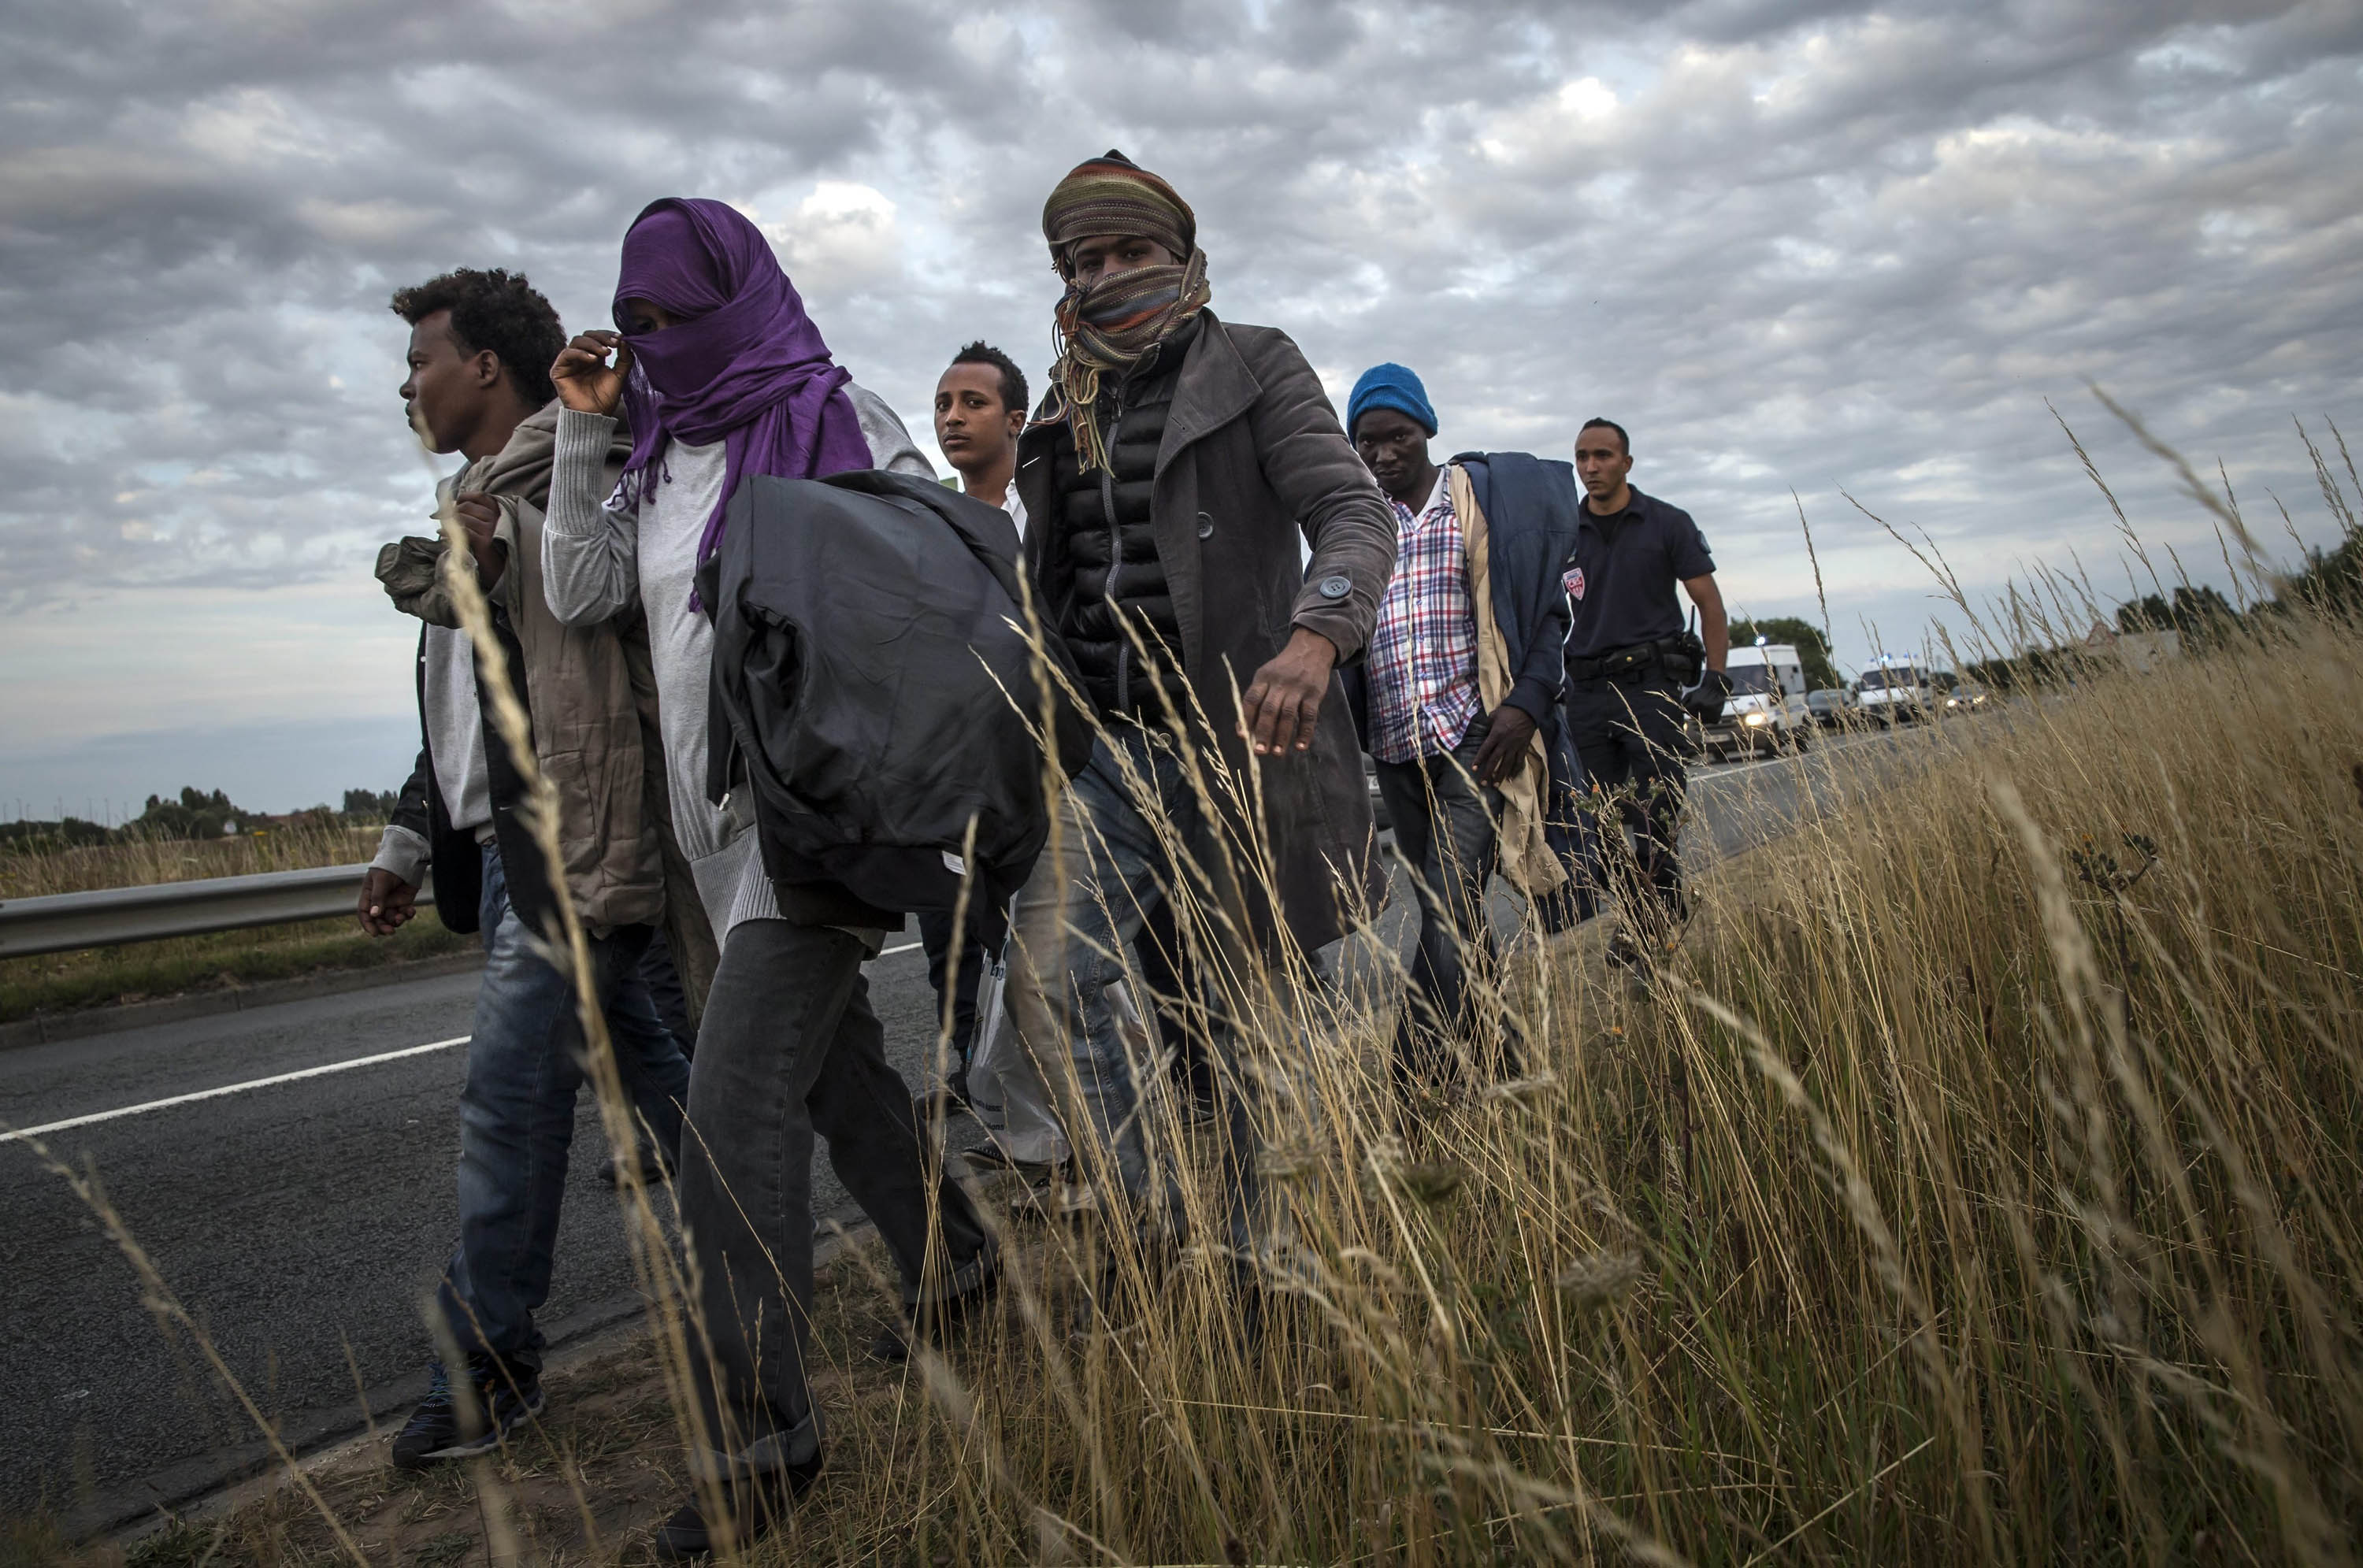 French police officers escort Eritrean migrants away from the Channel Tunnel entrance on Aug. 3. (Etienne Laurent—EPA)